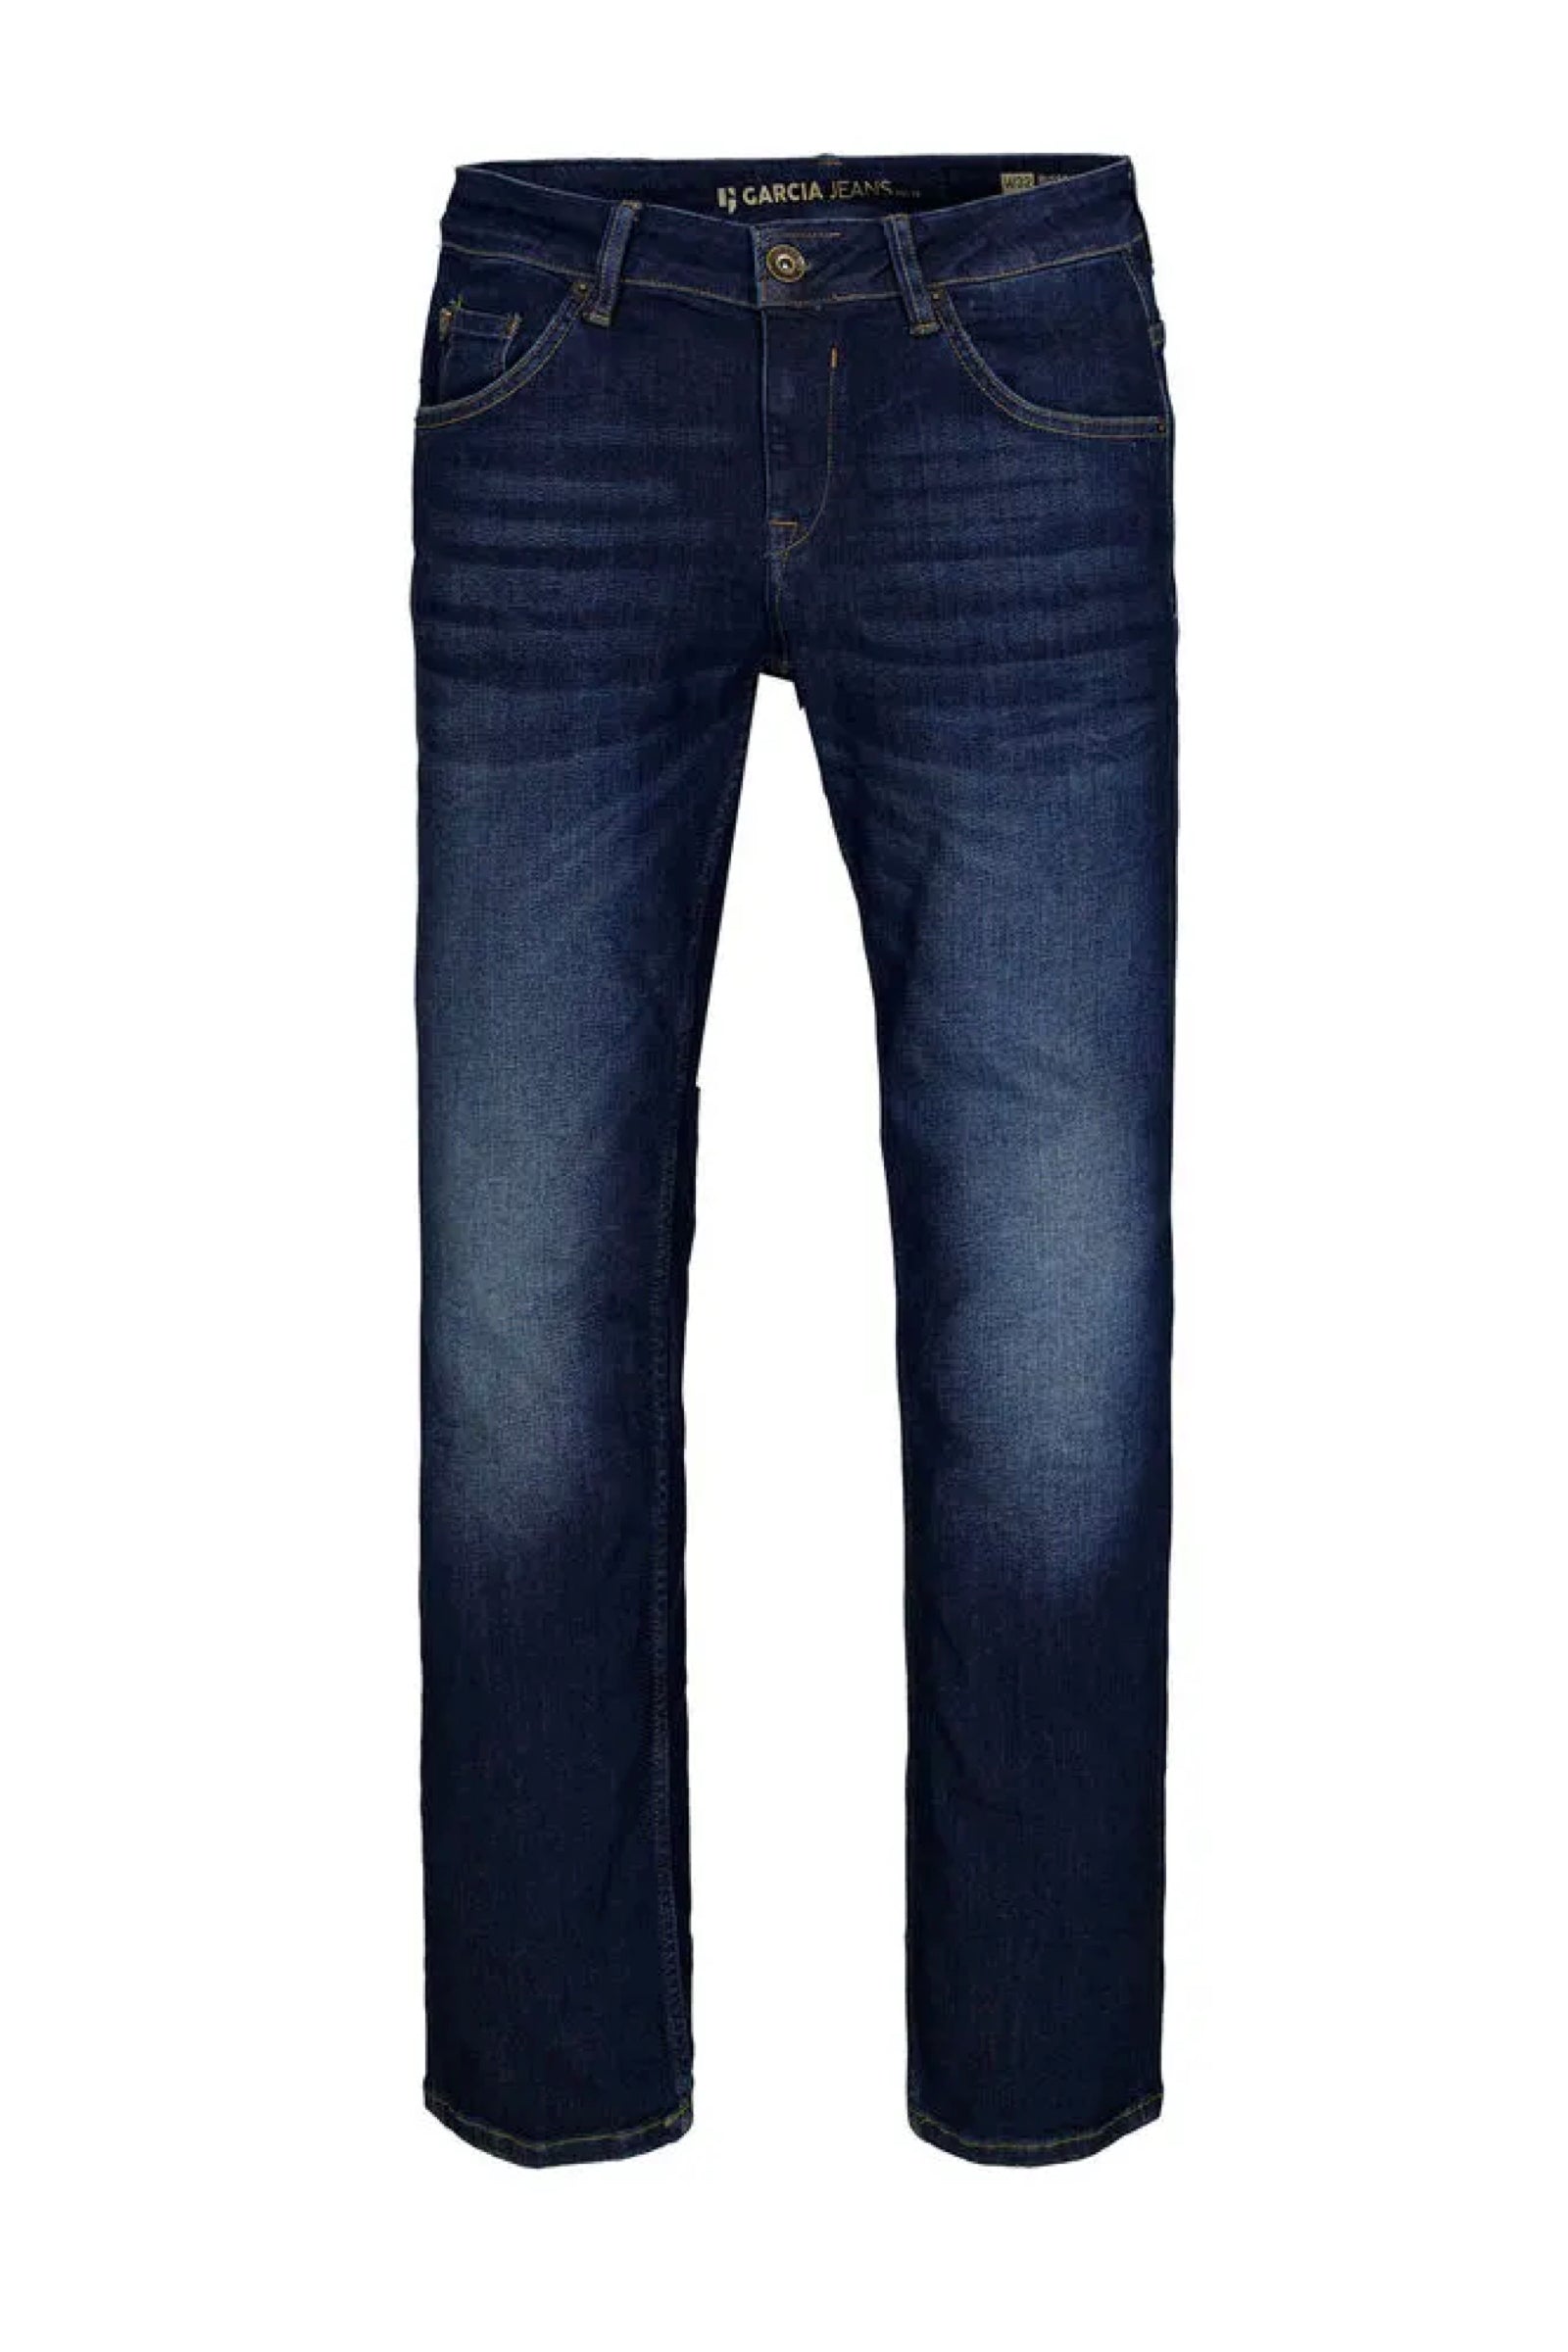 RUSSO 611 TAPERED JEAN - DARK USED